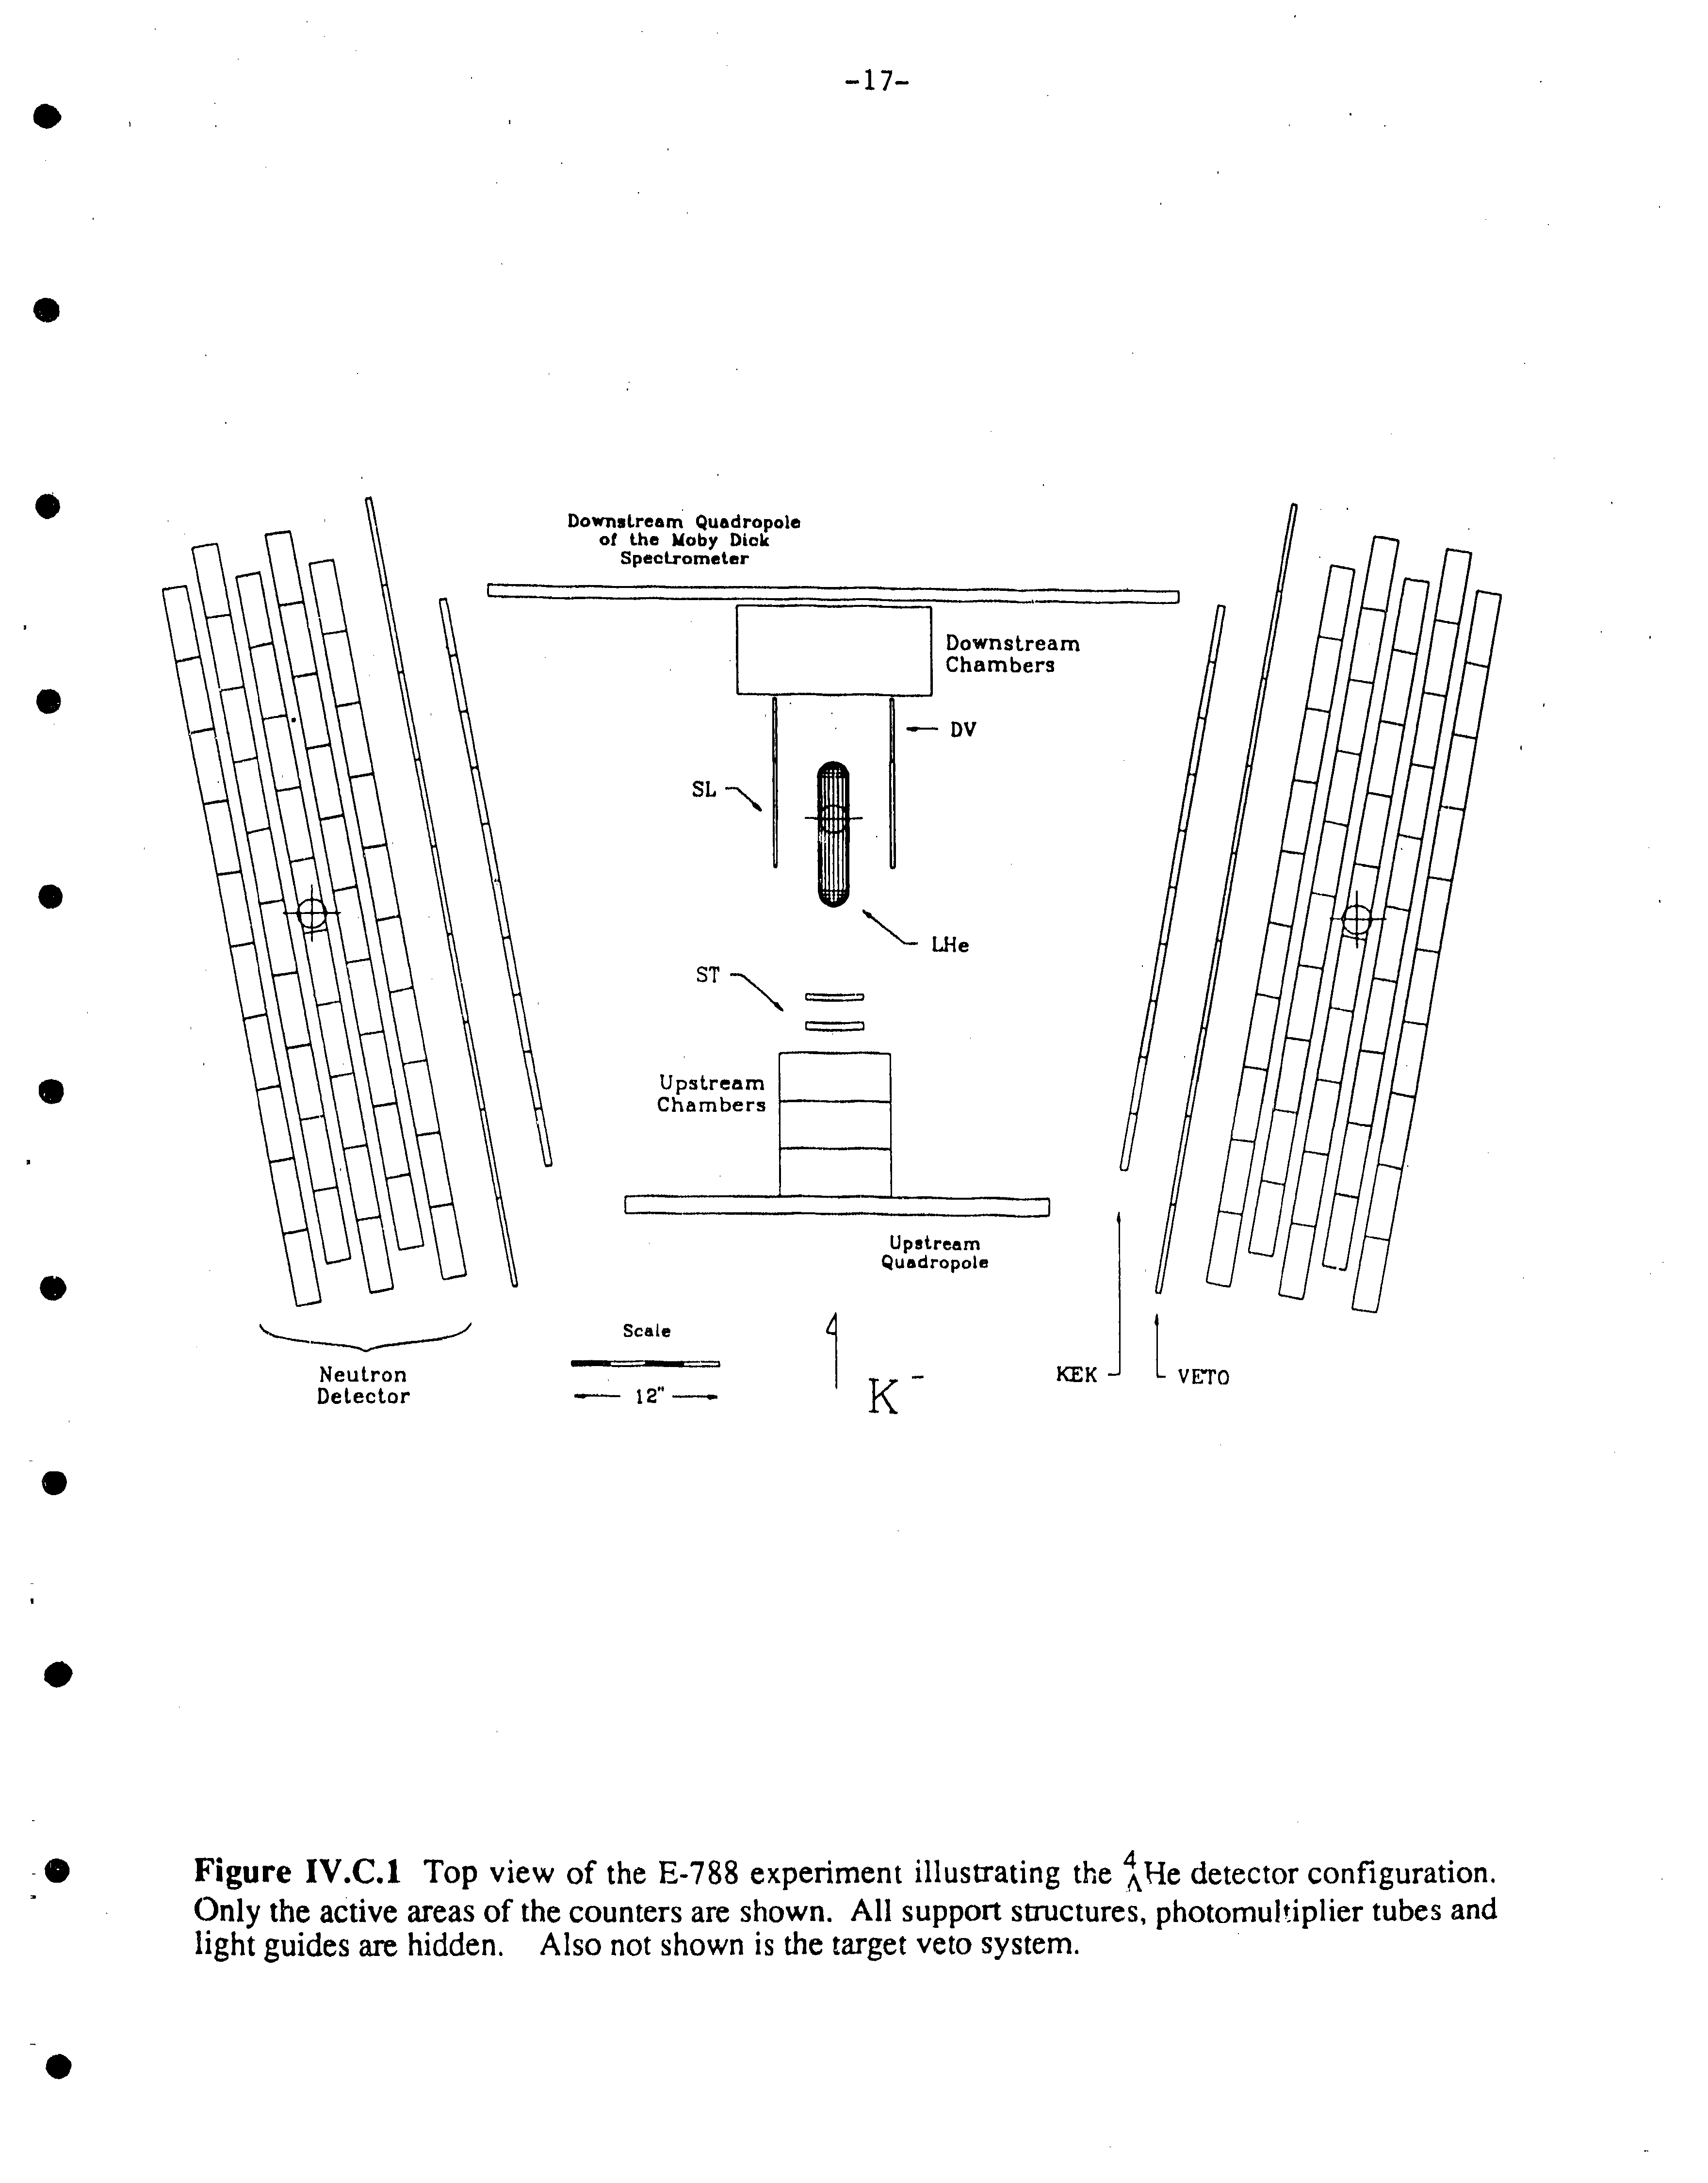 Figure IV.C.l Top view of the E-788 experiment illustrating the He detector configuration. Only the active areas of the counters are shown. All support structures, photomultiplier tubes and light guides are hidden. Also not shown is the target veto system.